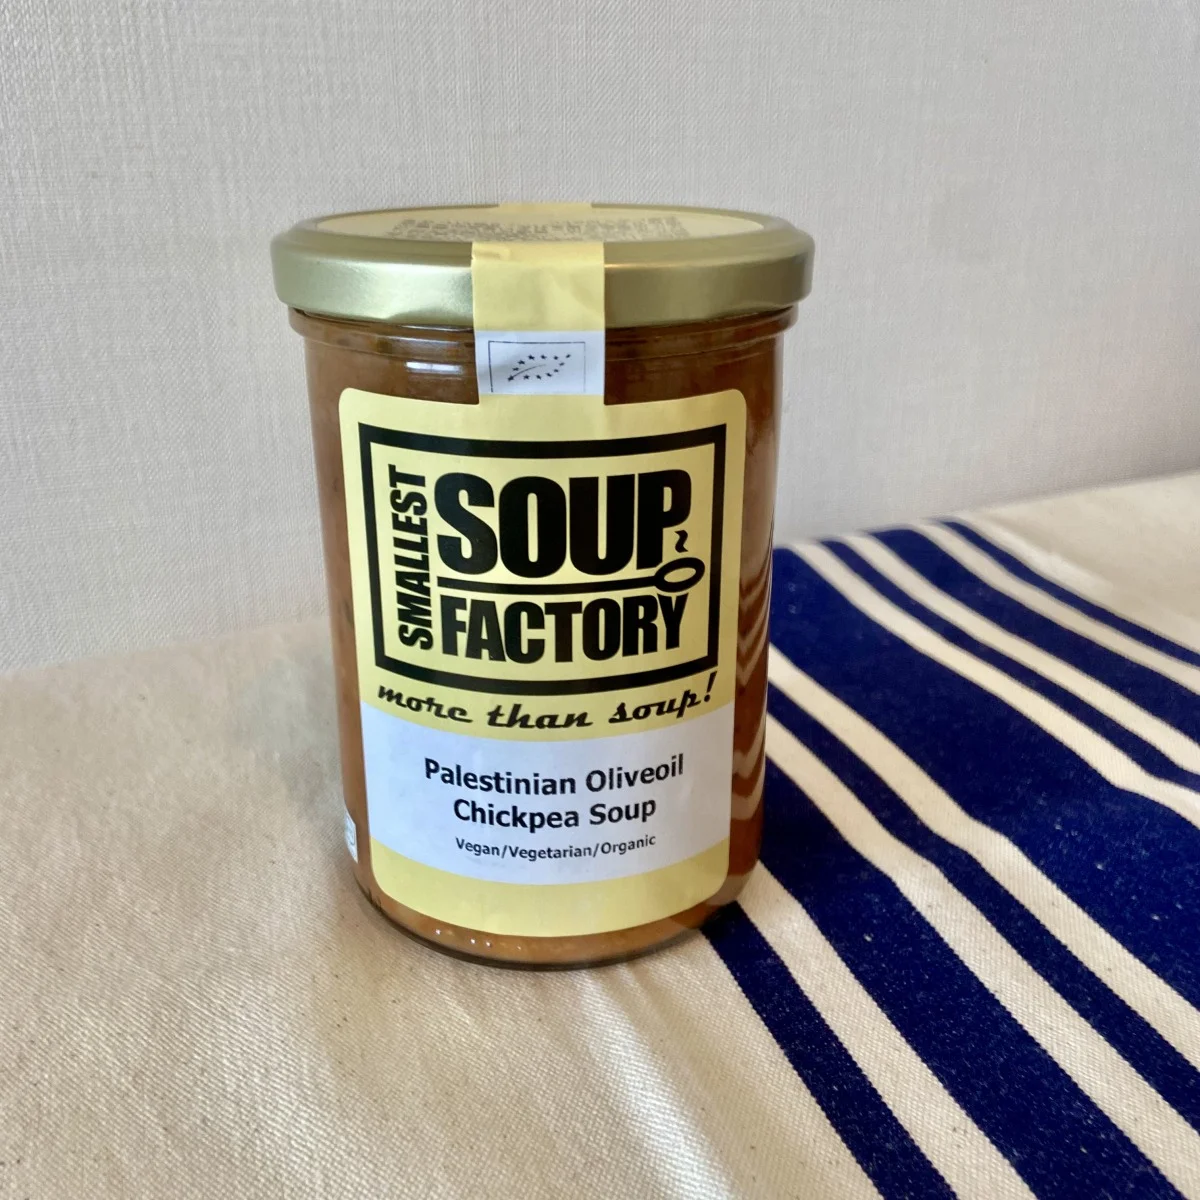 Smallest Soup Factory　ベジタブルスープ　Palestinian Oliveoil Chickpea Soup 